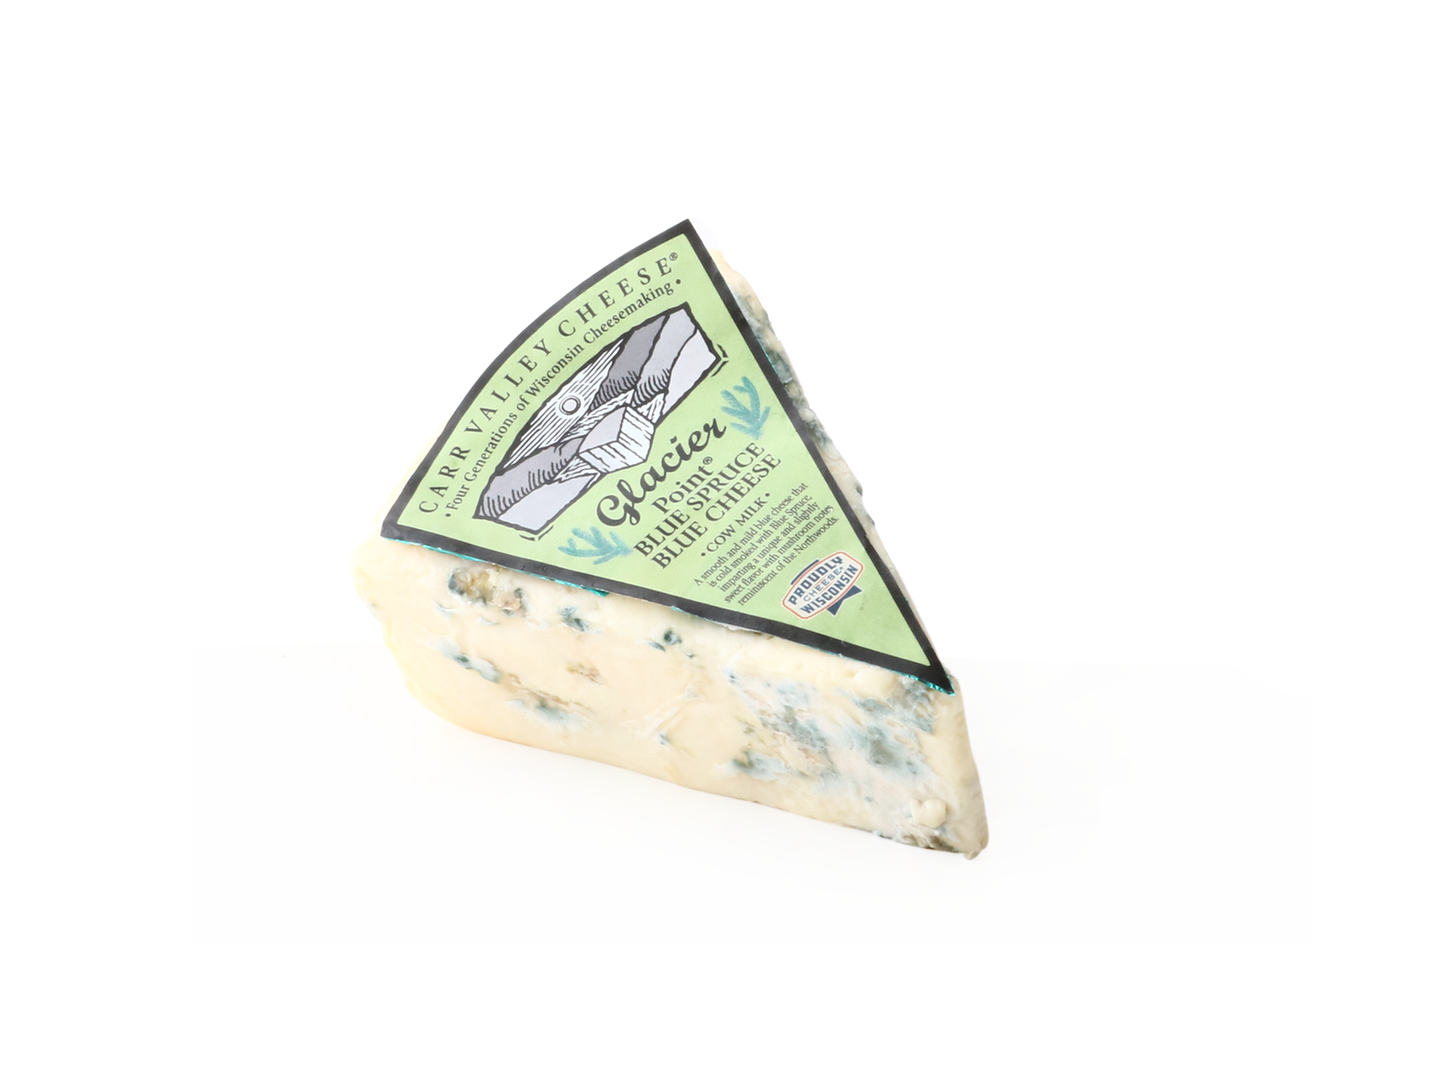 Blue Cheese Blue Spruce Smoked